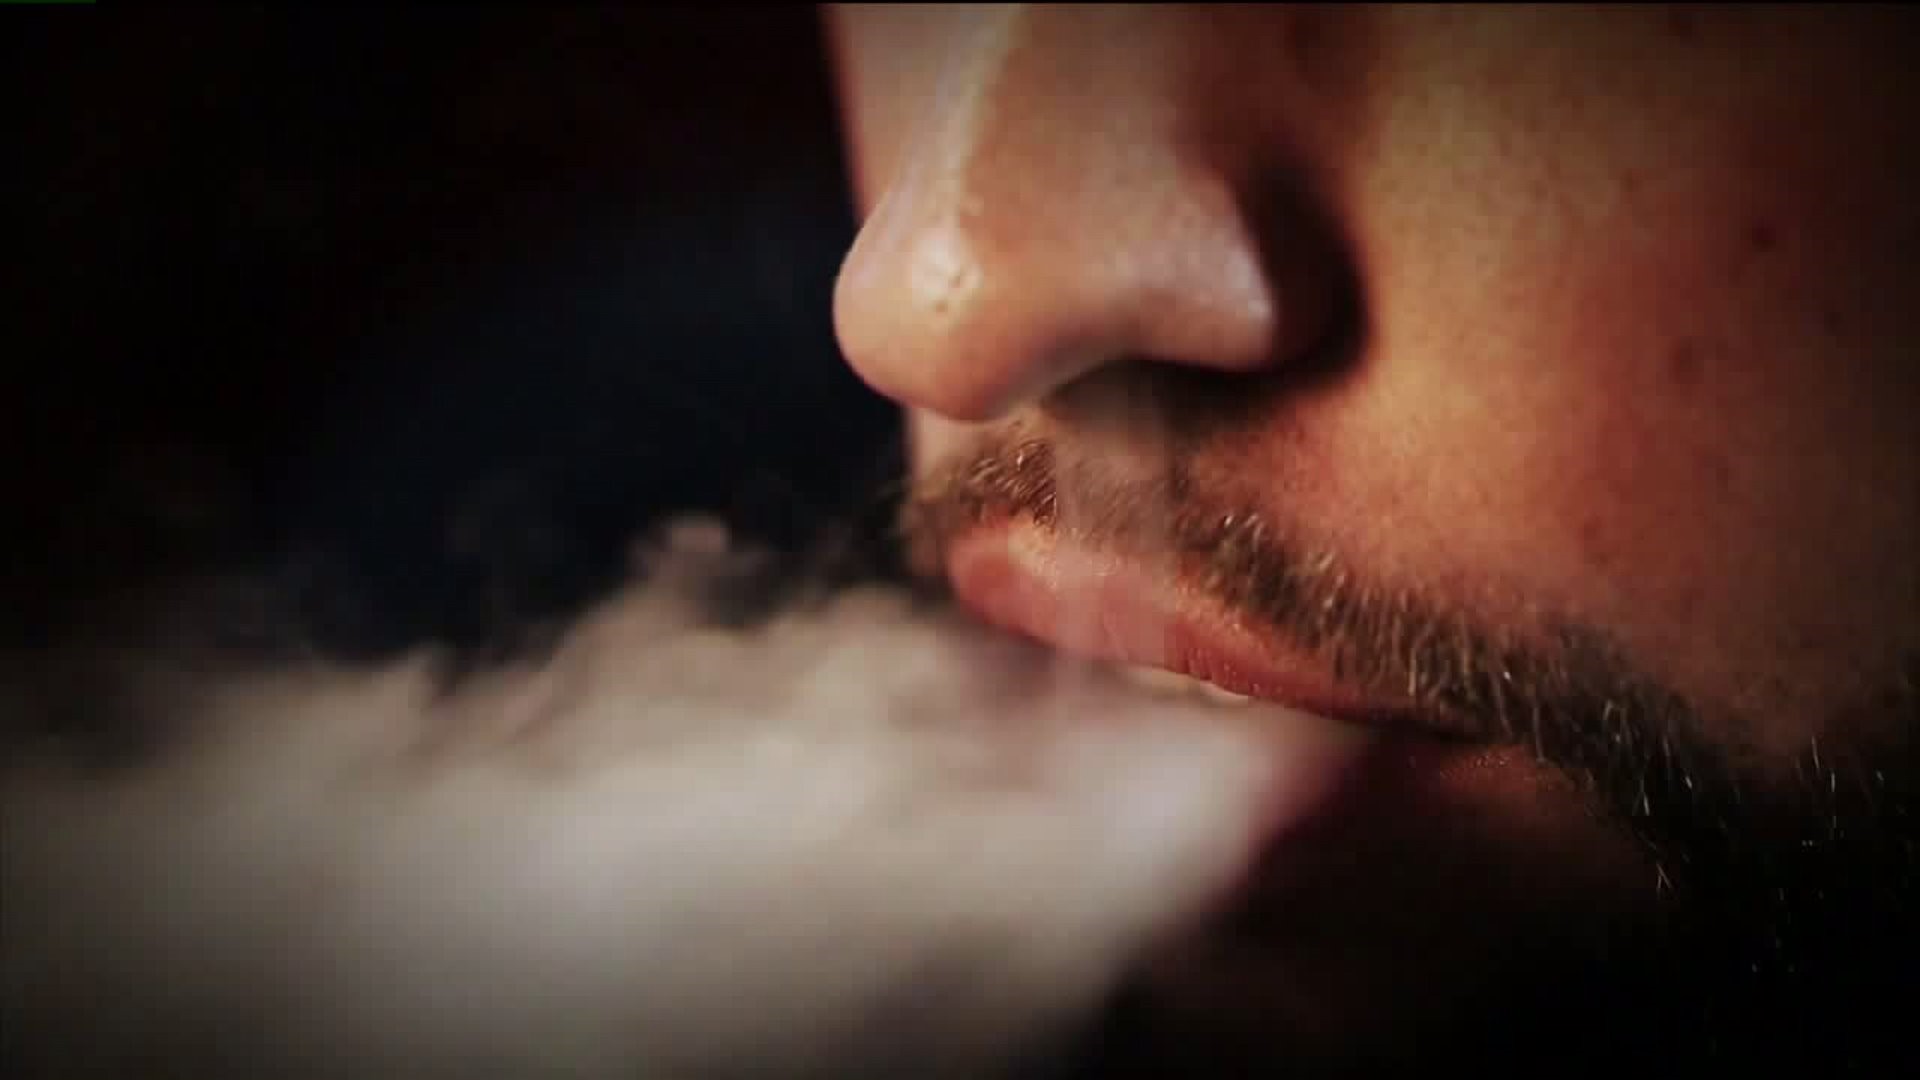 Vaping Raises Concerns at Local Schools, Health Systems